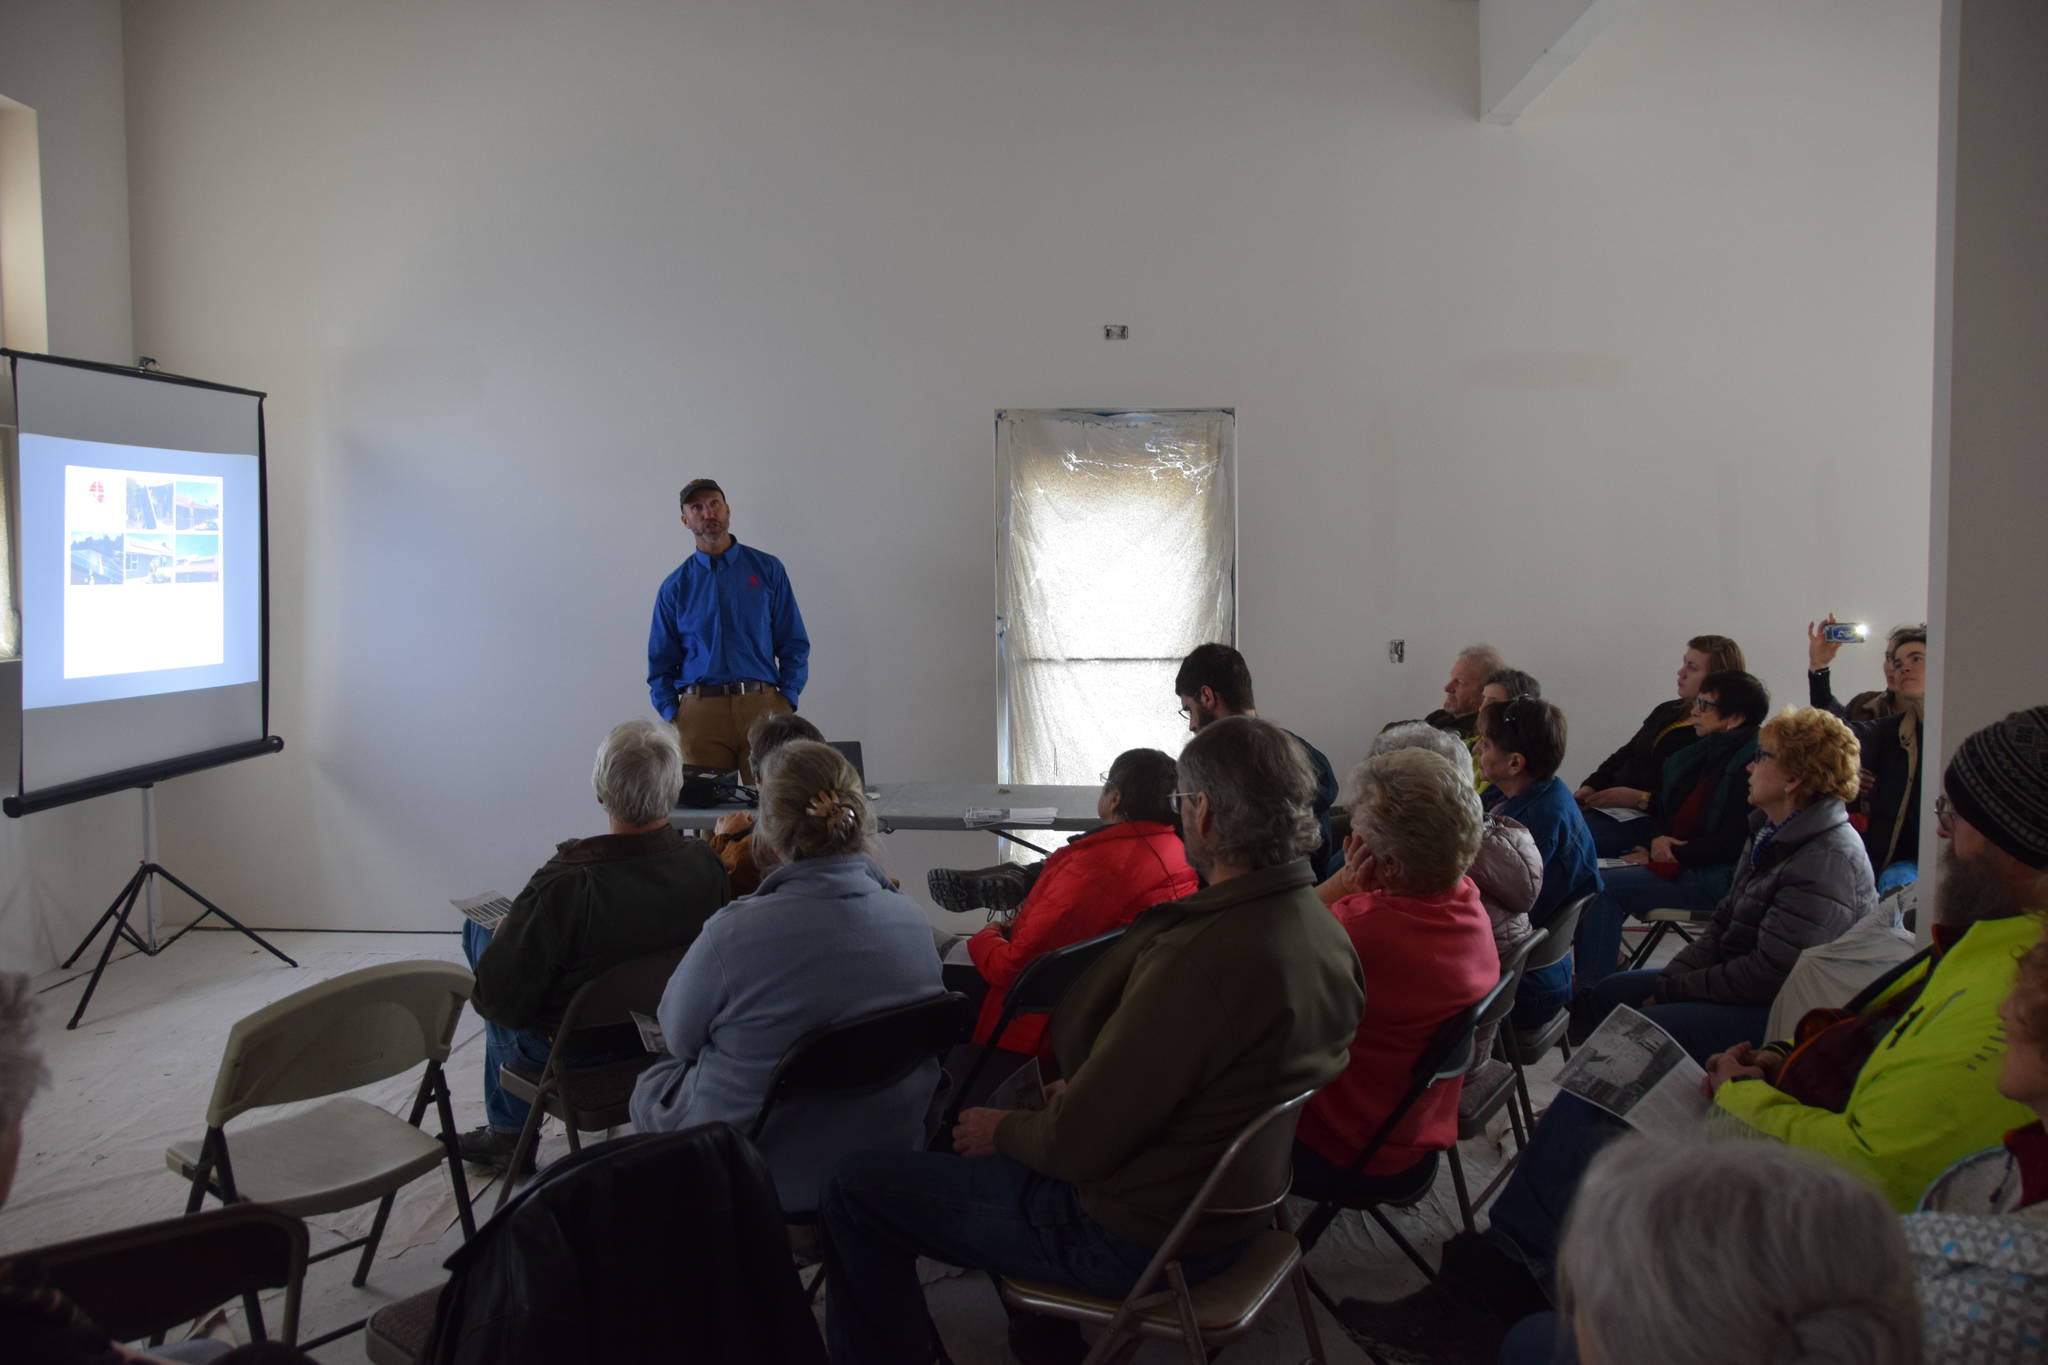 Ben May, owner of Anchorage Solar gives a presentation about solar technology to peninsula residents at the new River City Books location in Soldotna on Saturday. (Photo by Brian Mazurek/Peninsula Clarion)